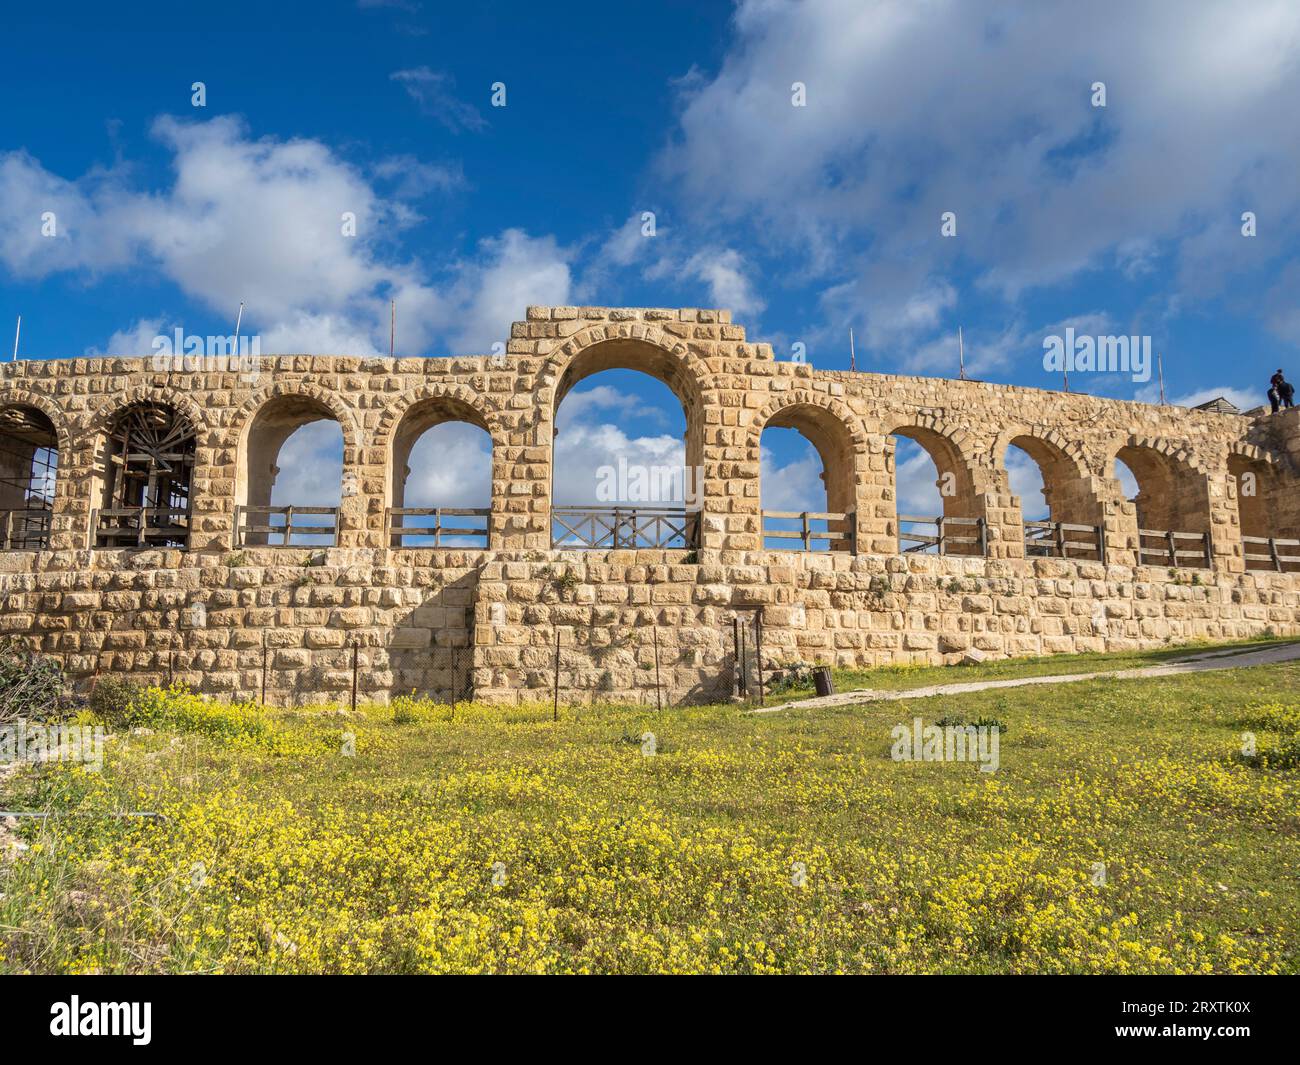 Entrance to the Hippodrome in Jerash, believed to have been founded in 331 BC by Alexander the Great, Jerash, Jordan, Middle East Stock Photo